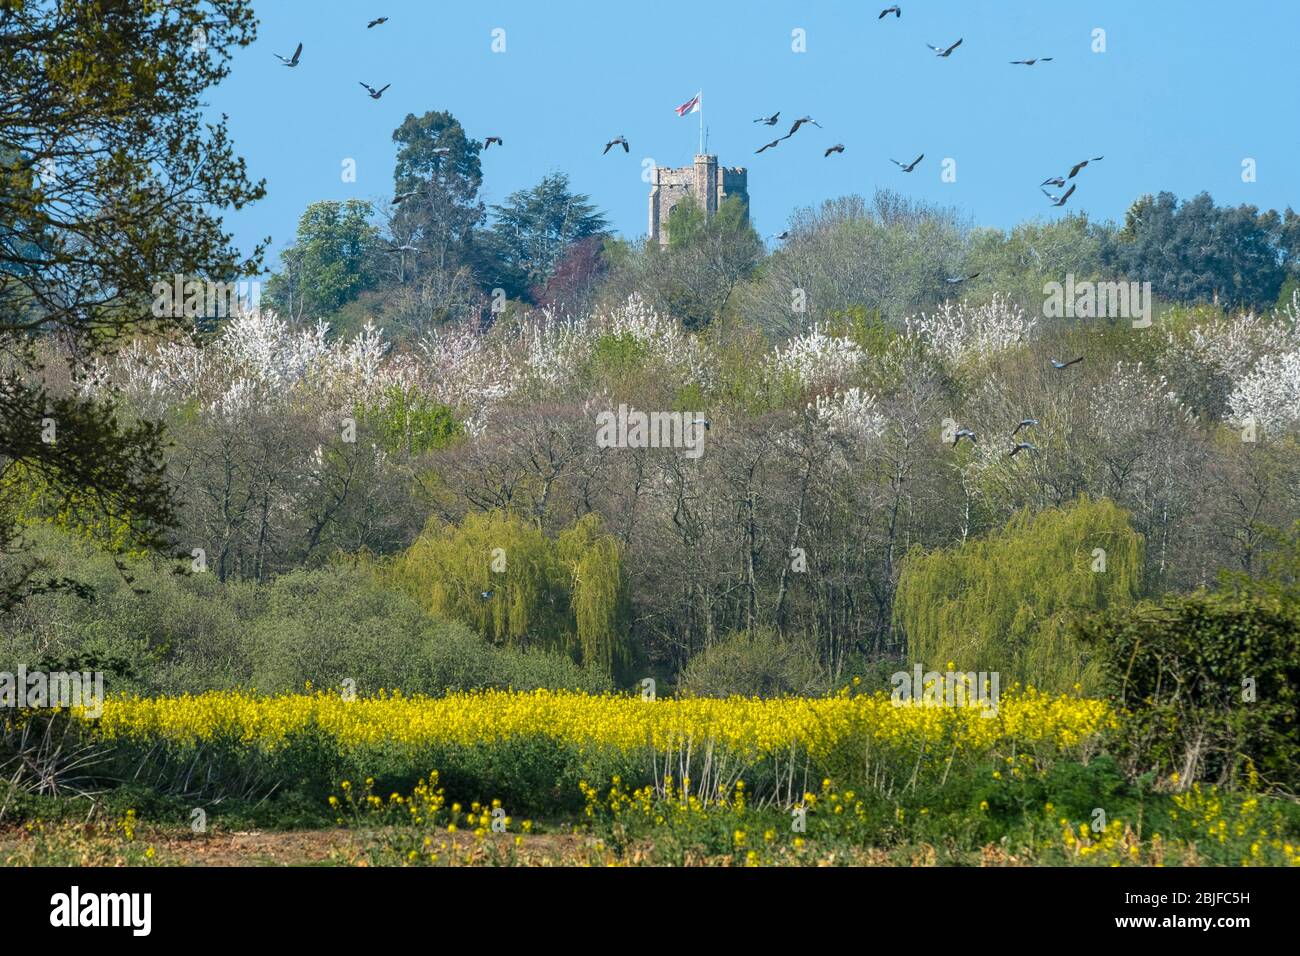 Spring time blossom in Hoxne, Suffolk, England,UK. Pidgeons in the sky flying over  Saint Peter and Paul's church tower with the flag of Saint George. Stock Photo